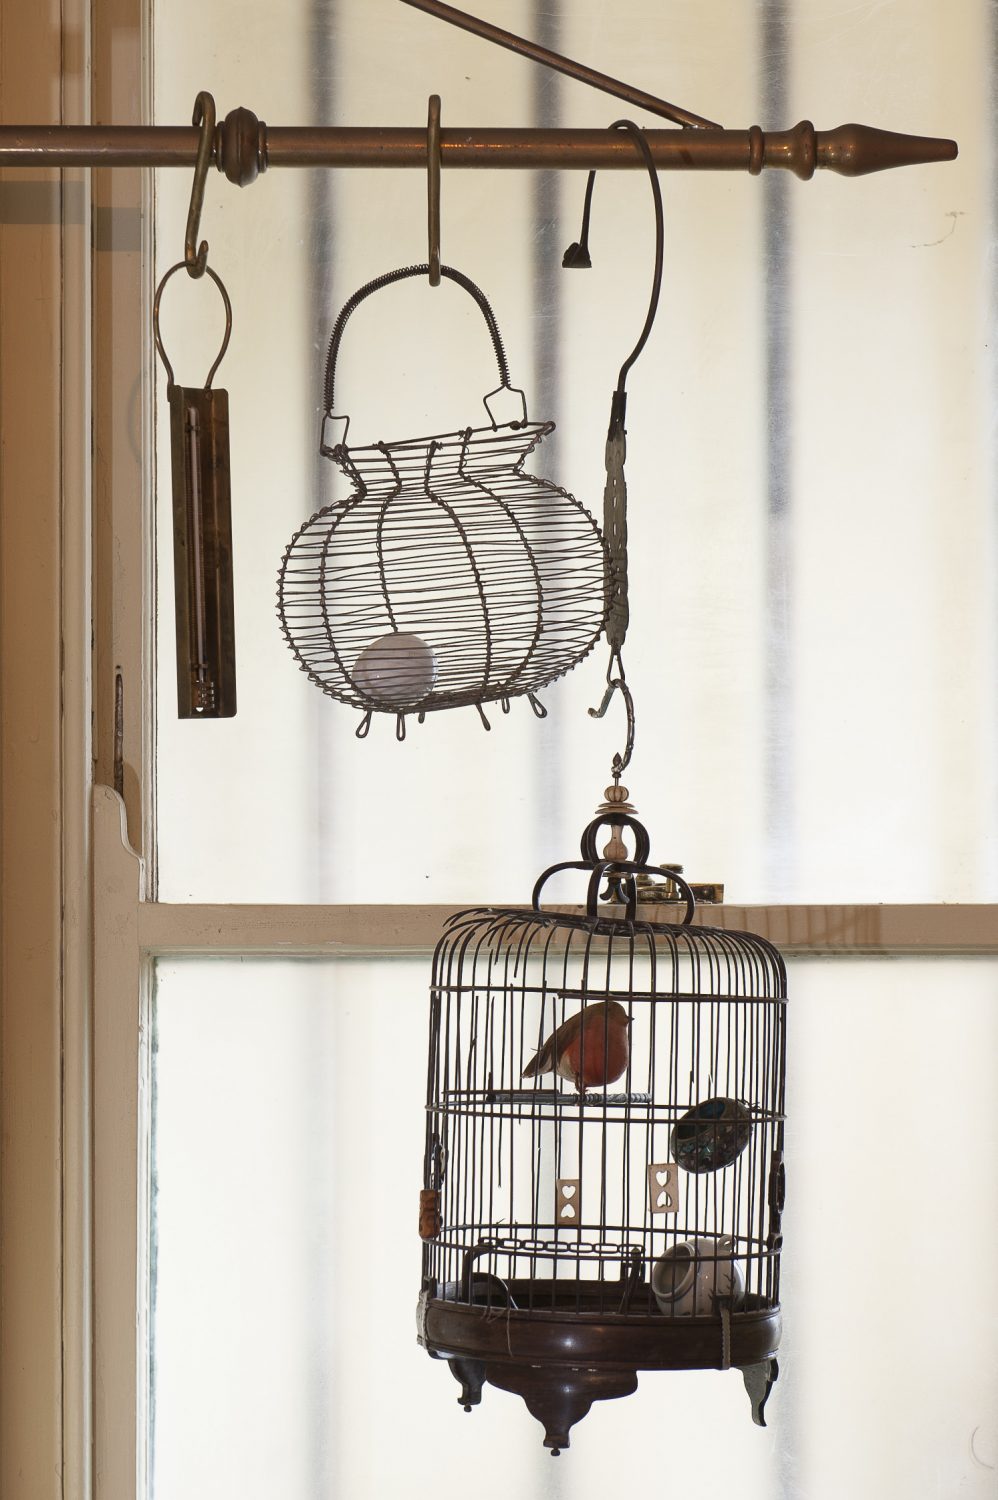 A decorative birdcage hangs in the kitchen